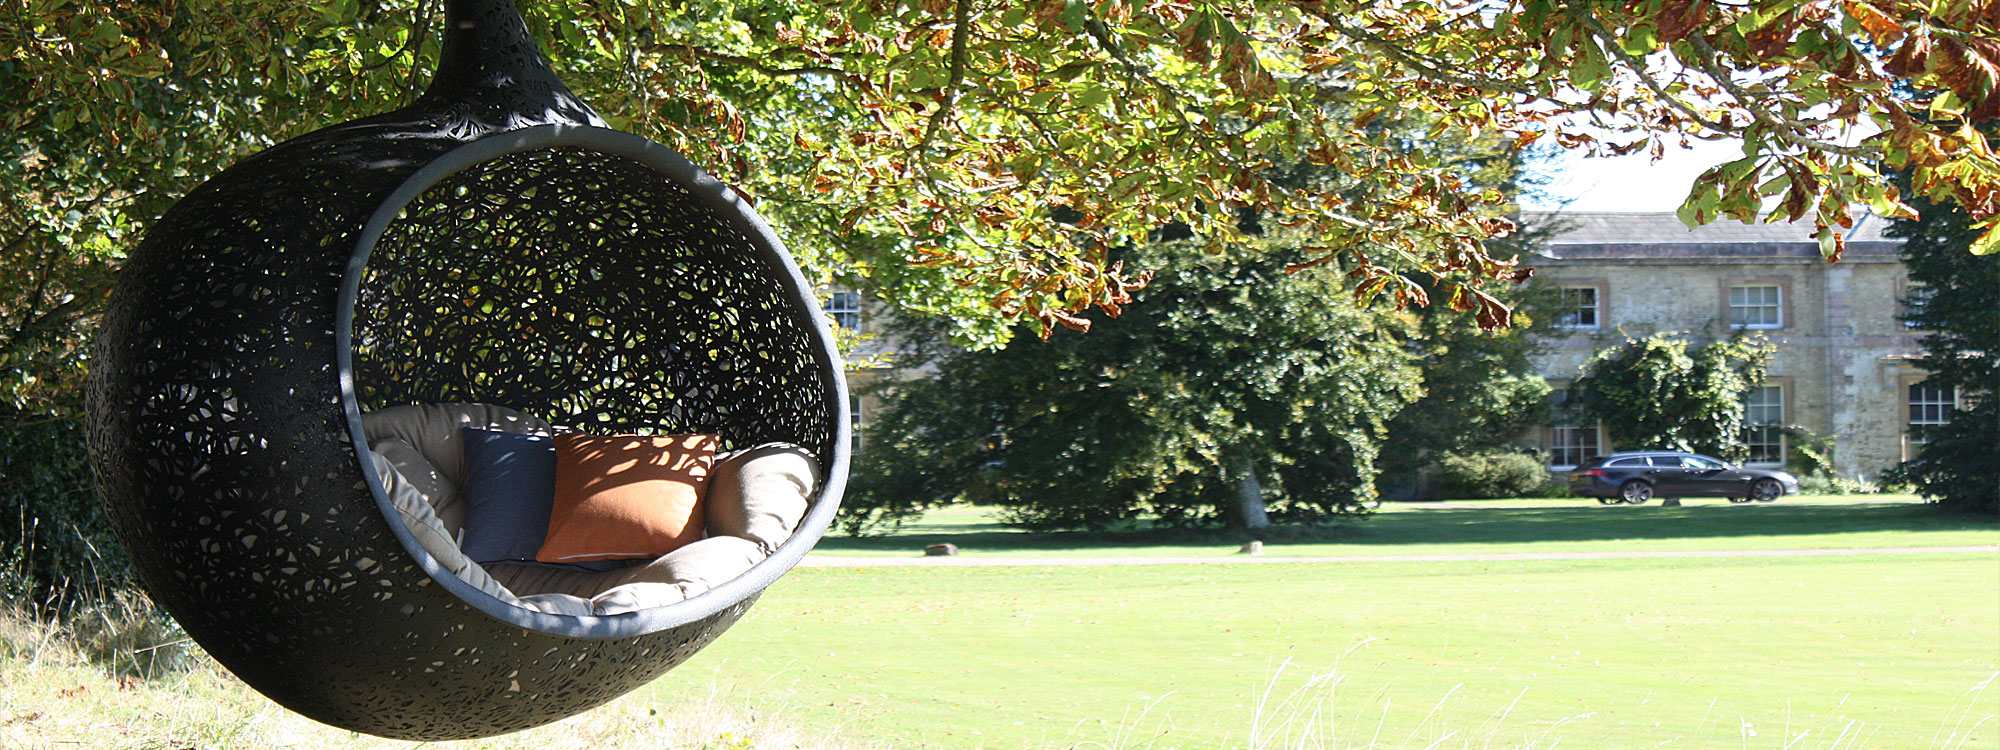 Image of Bios Hide sofa swing seat outside Sussex stately home.